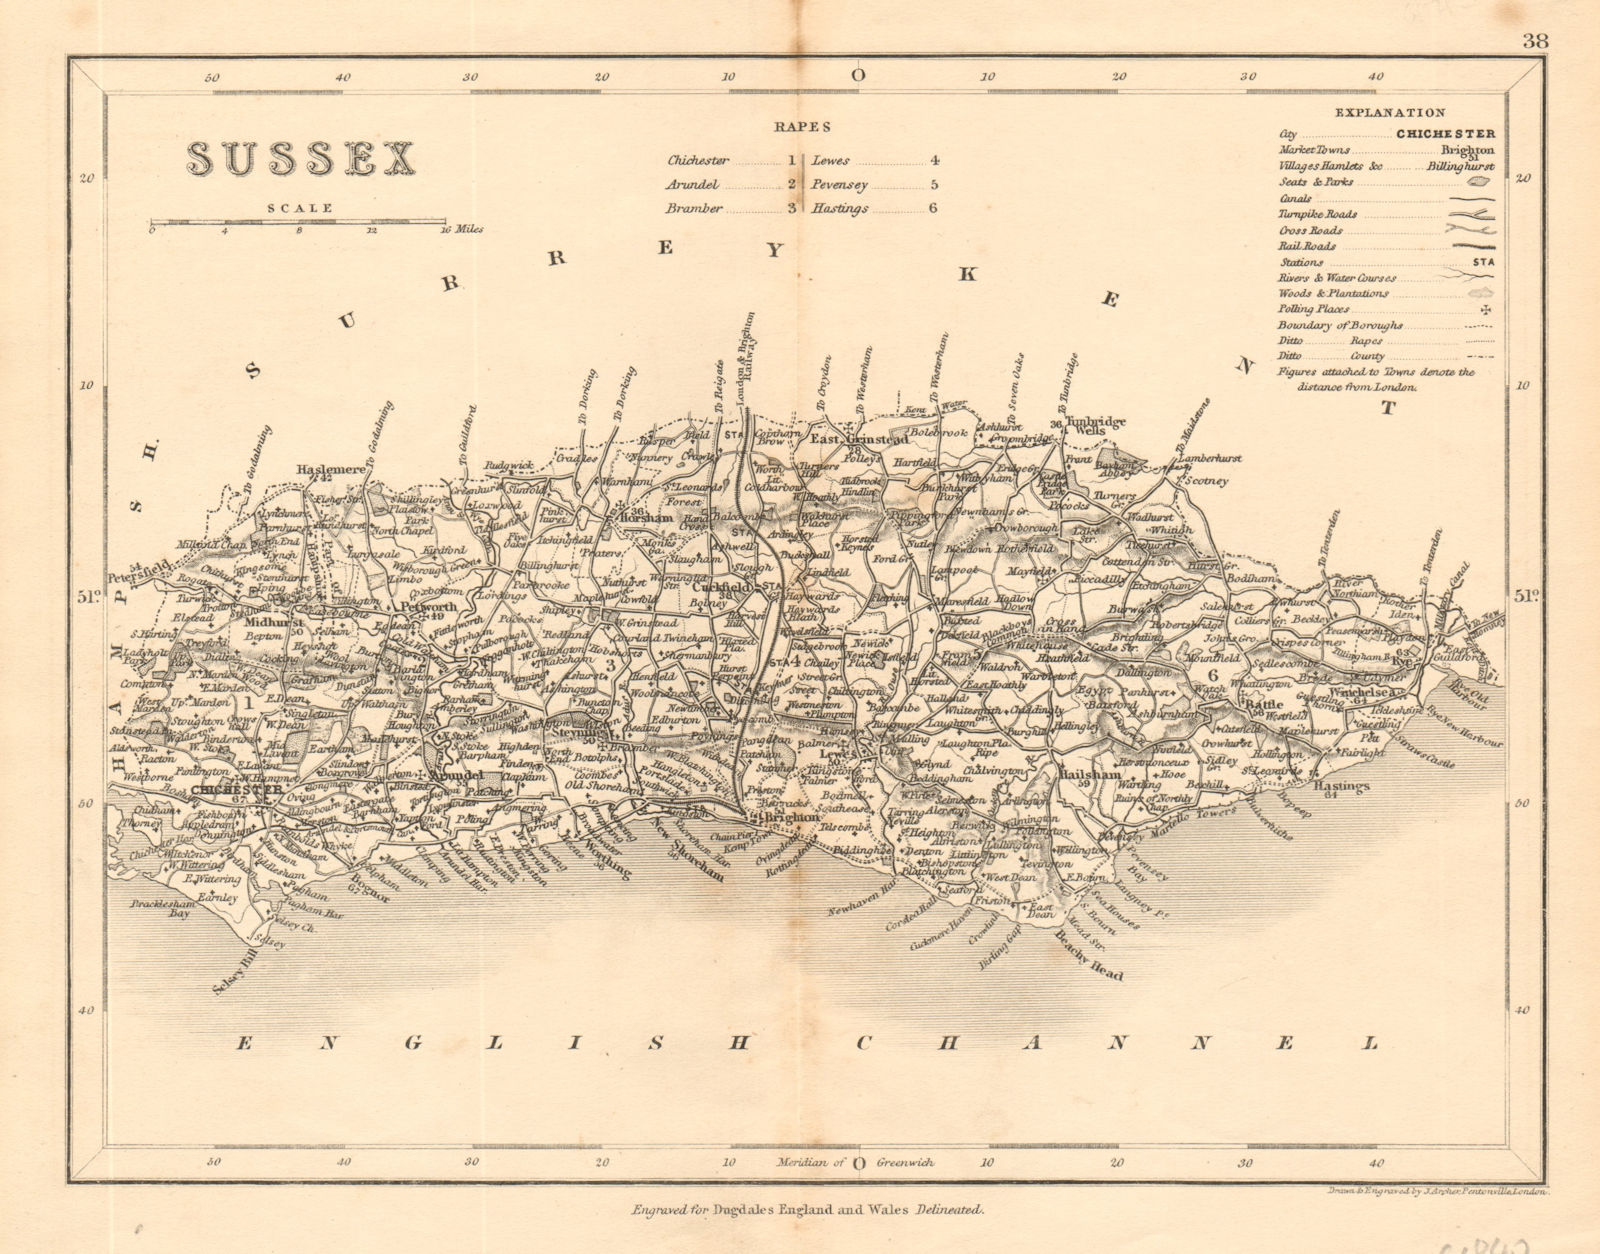 Associate Product SUSSEX county map by ARCHER & DUGDALE. Seats polling places canals c1845